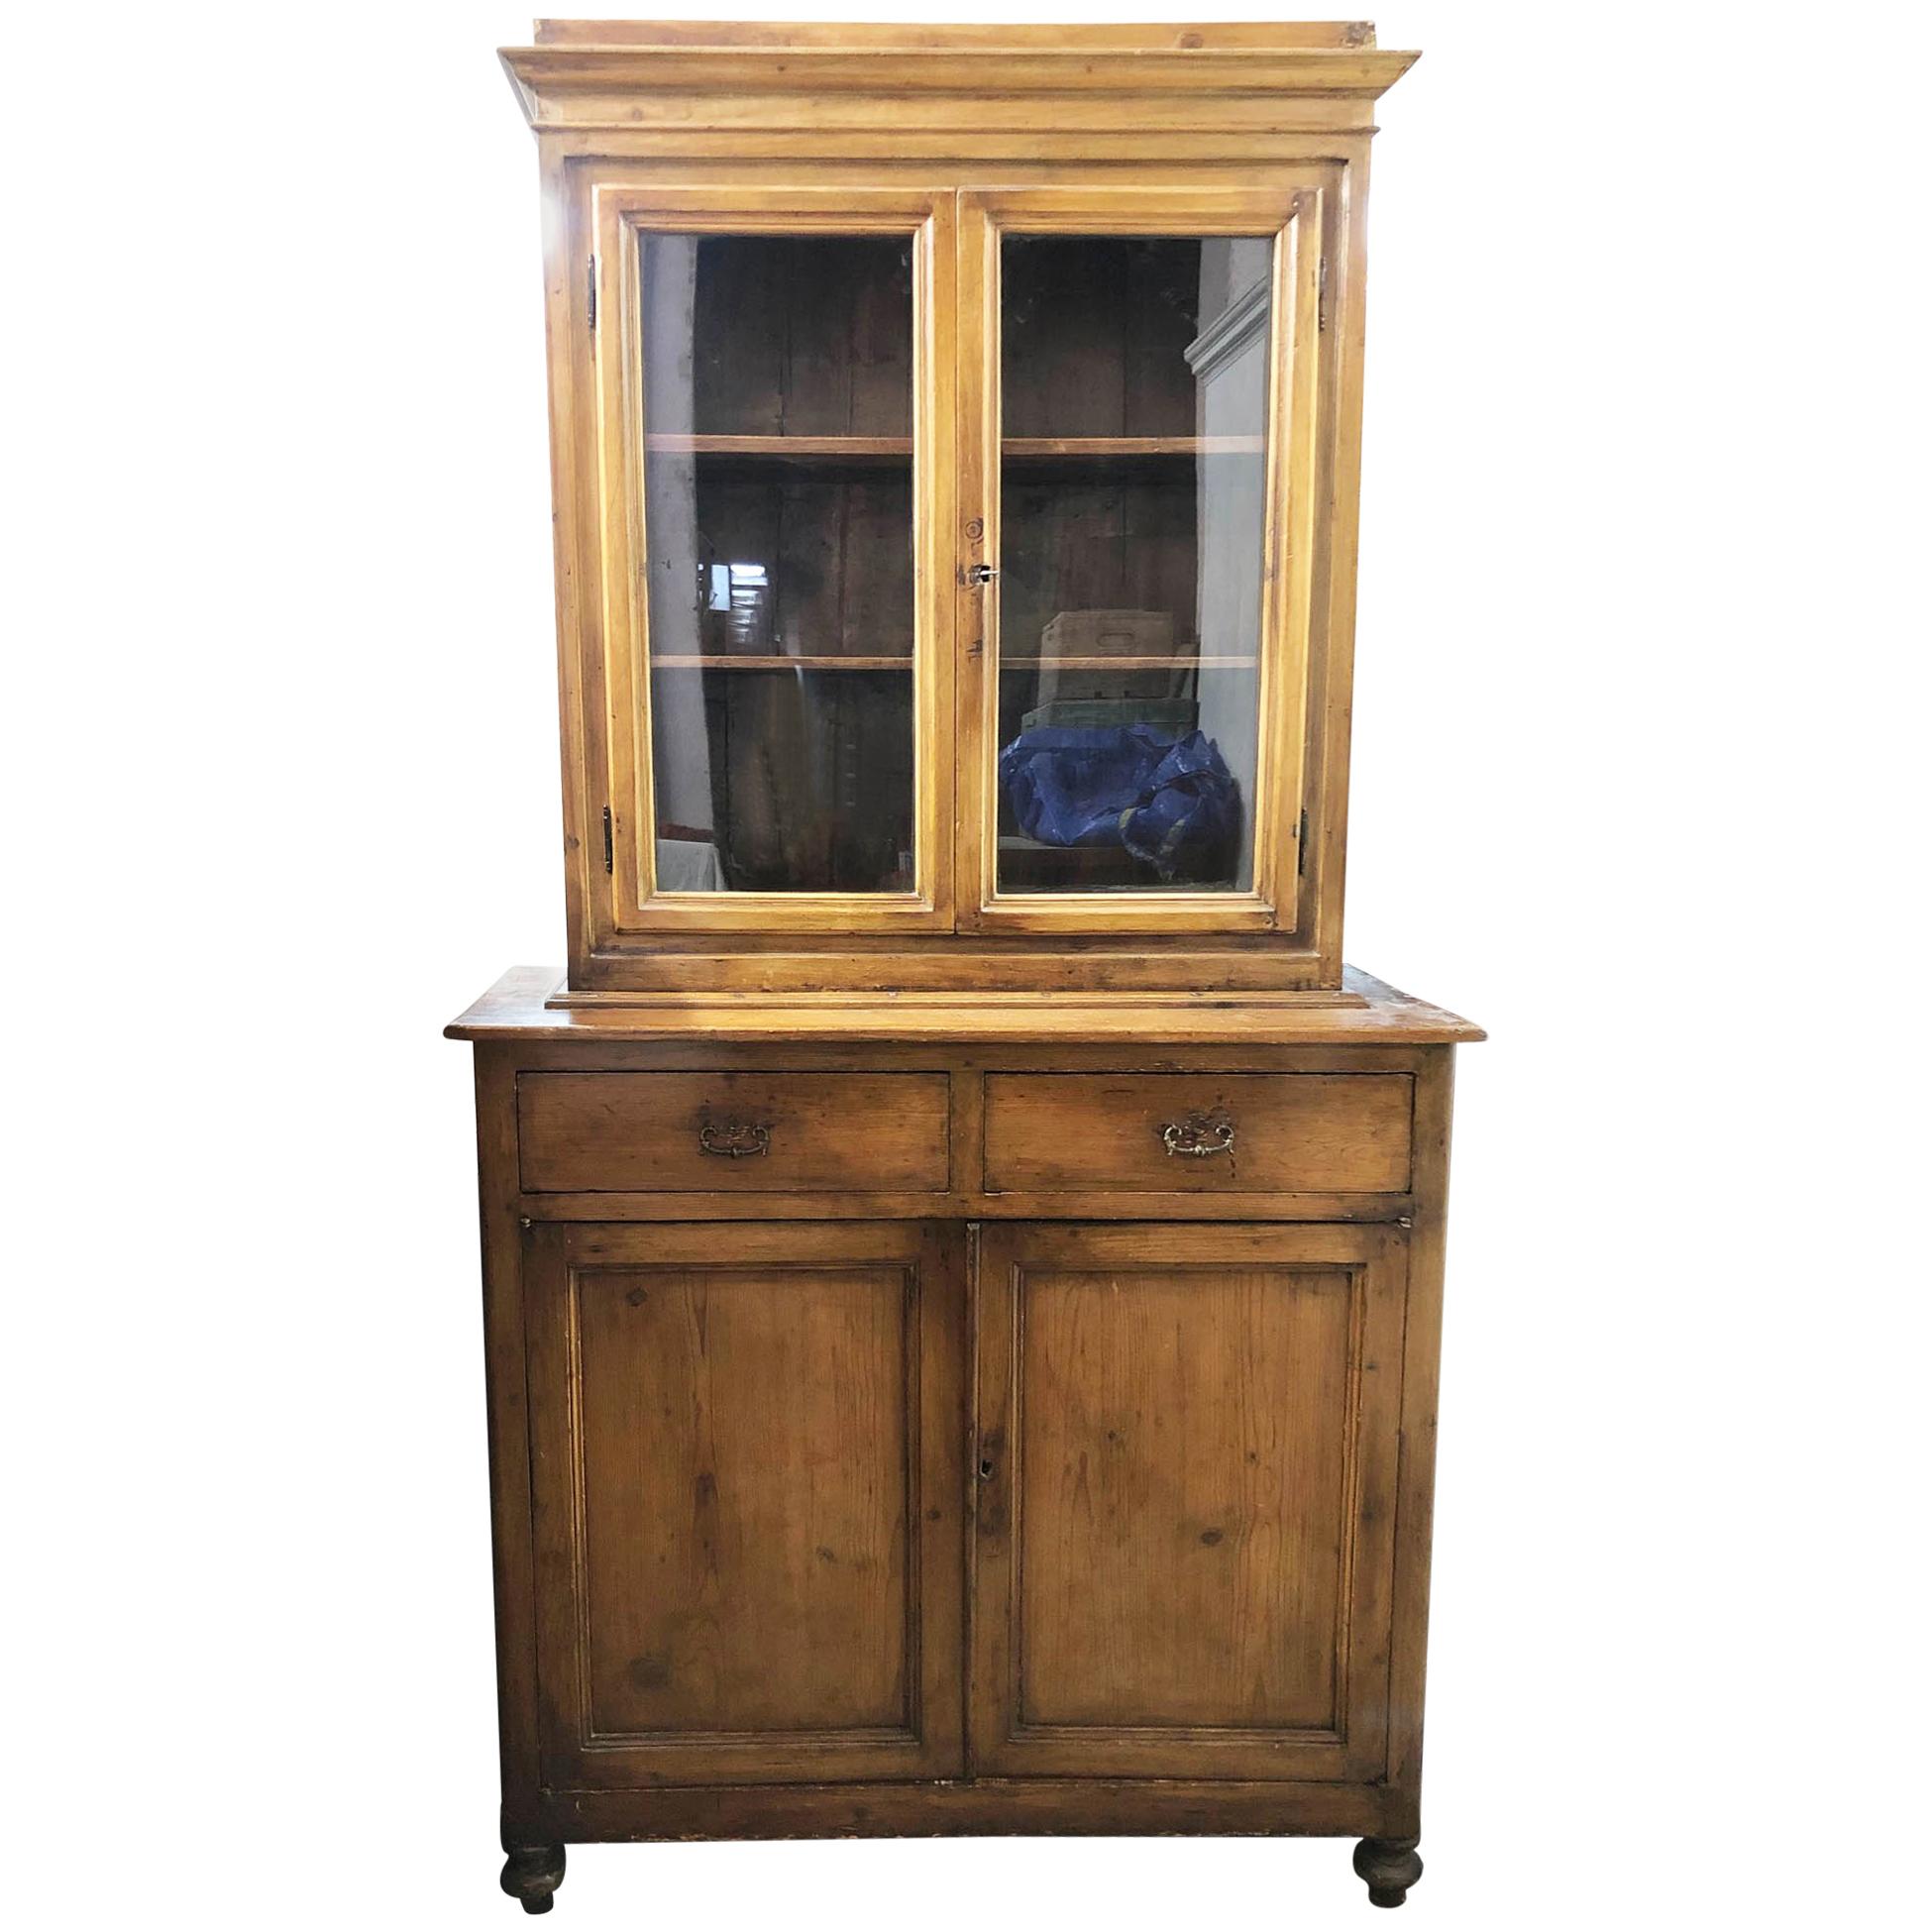 Early 20th Century Antique Tuscan Fir Showcase, Restored, Wax Polished